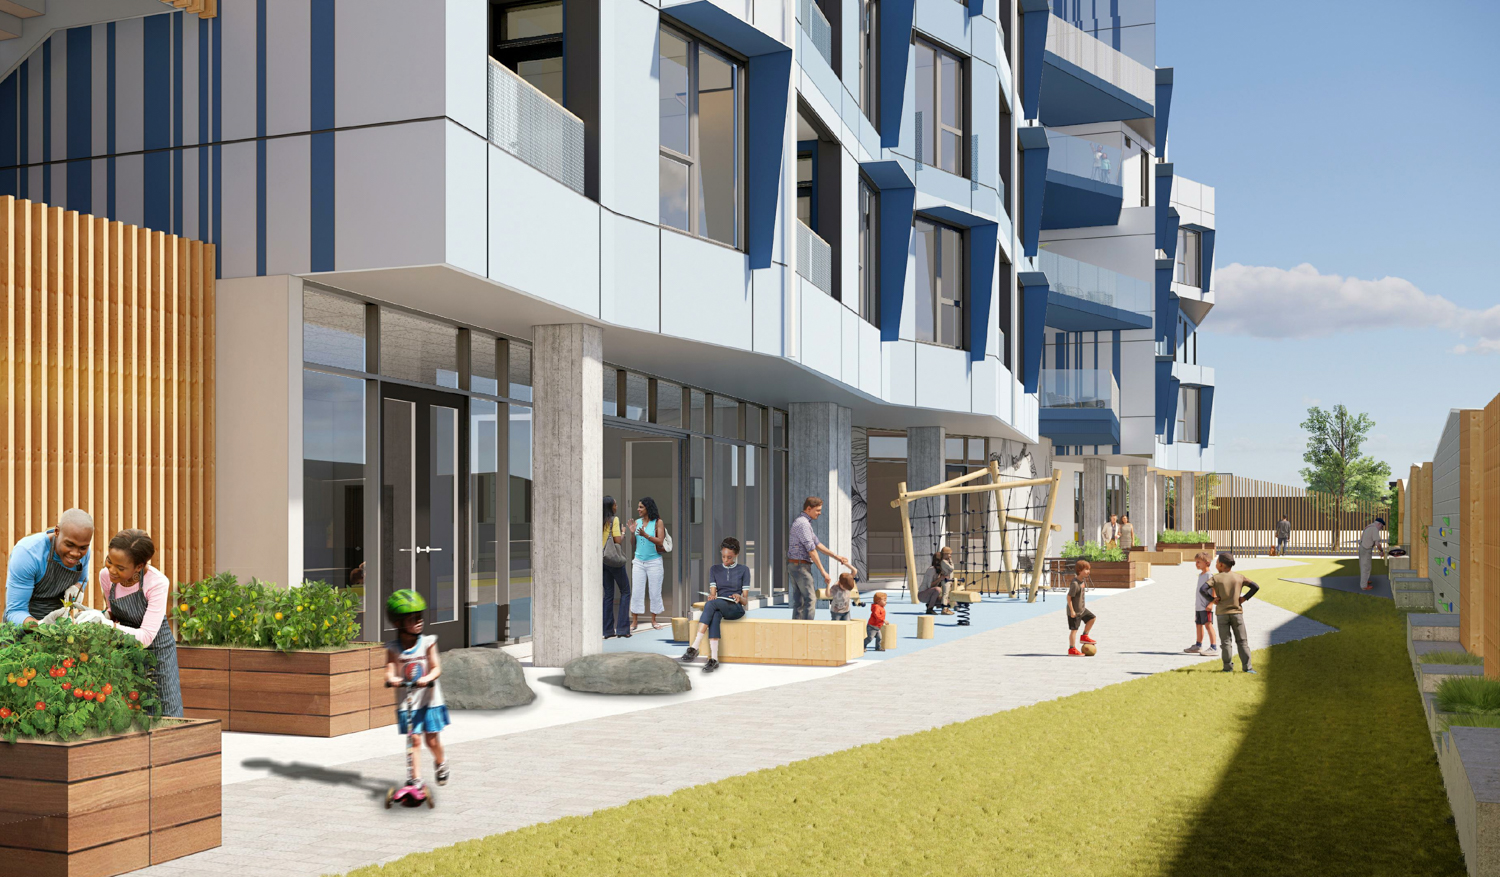 Magnolias Affordable Housing Project garden and children's play area, rendering by SERA Architects